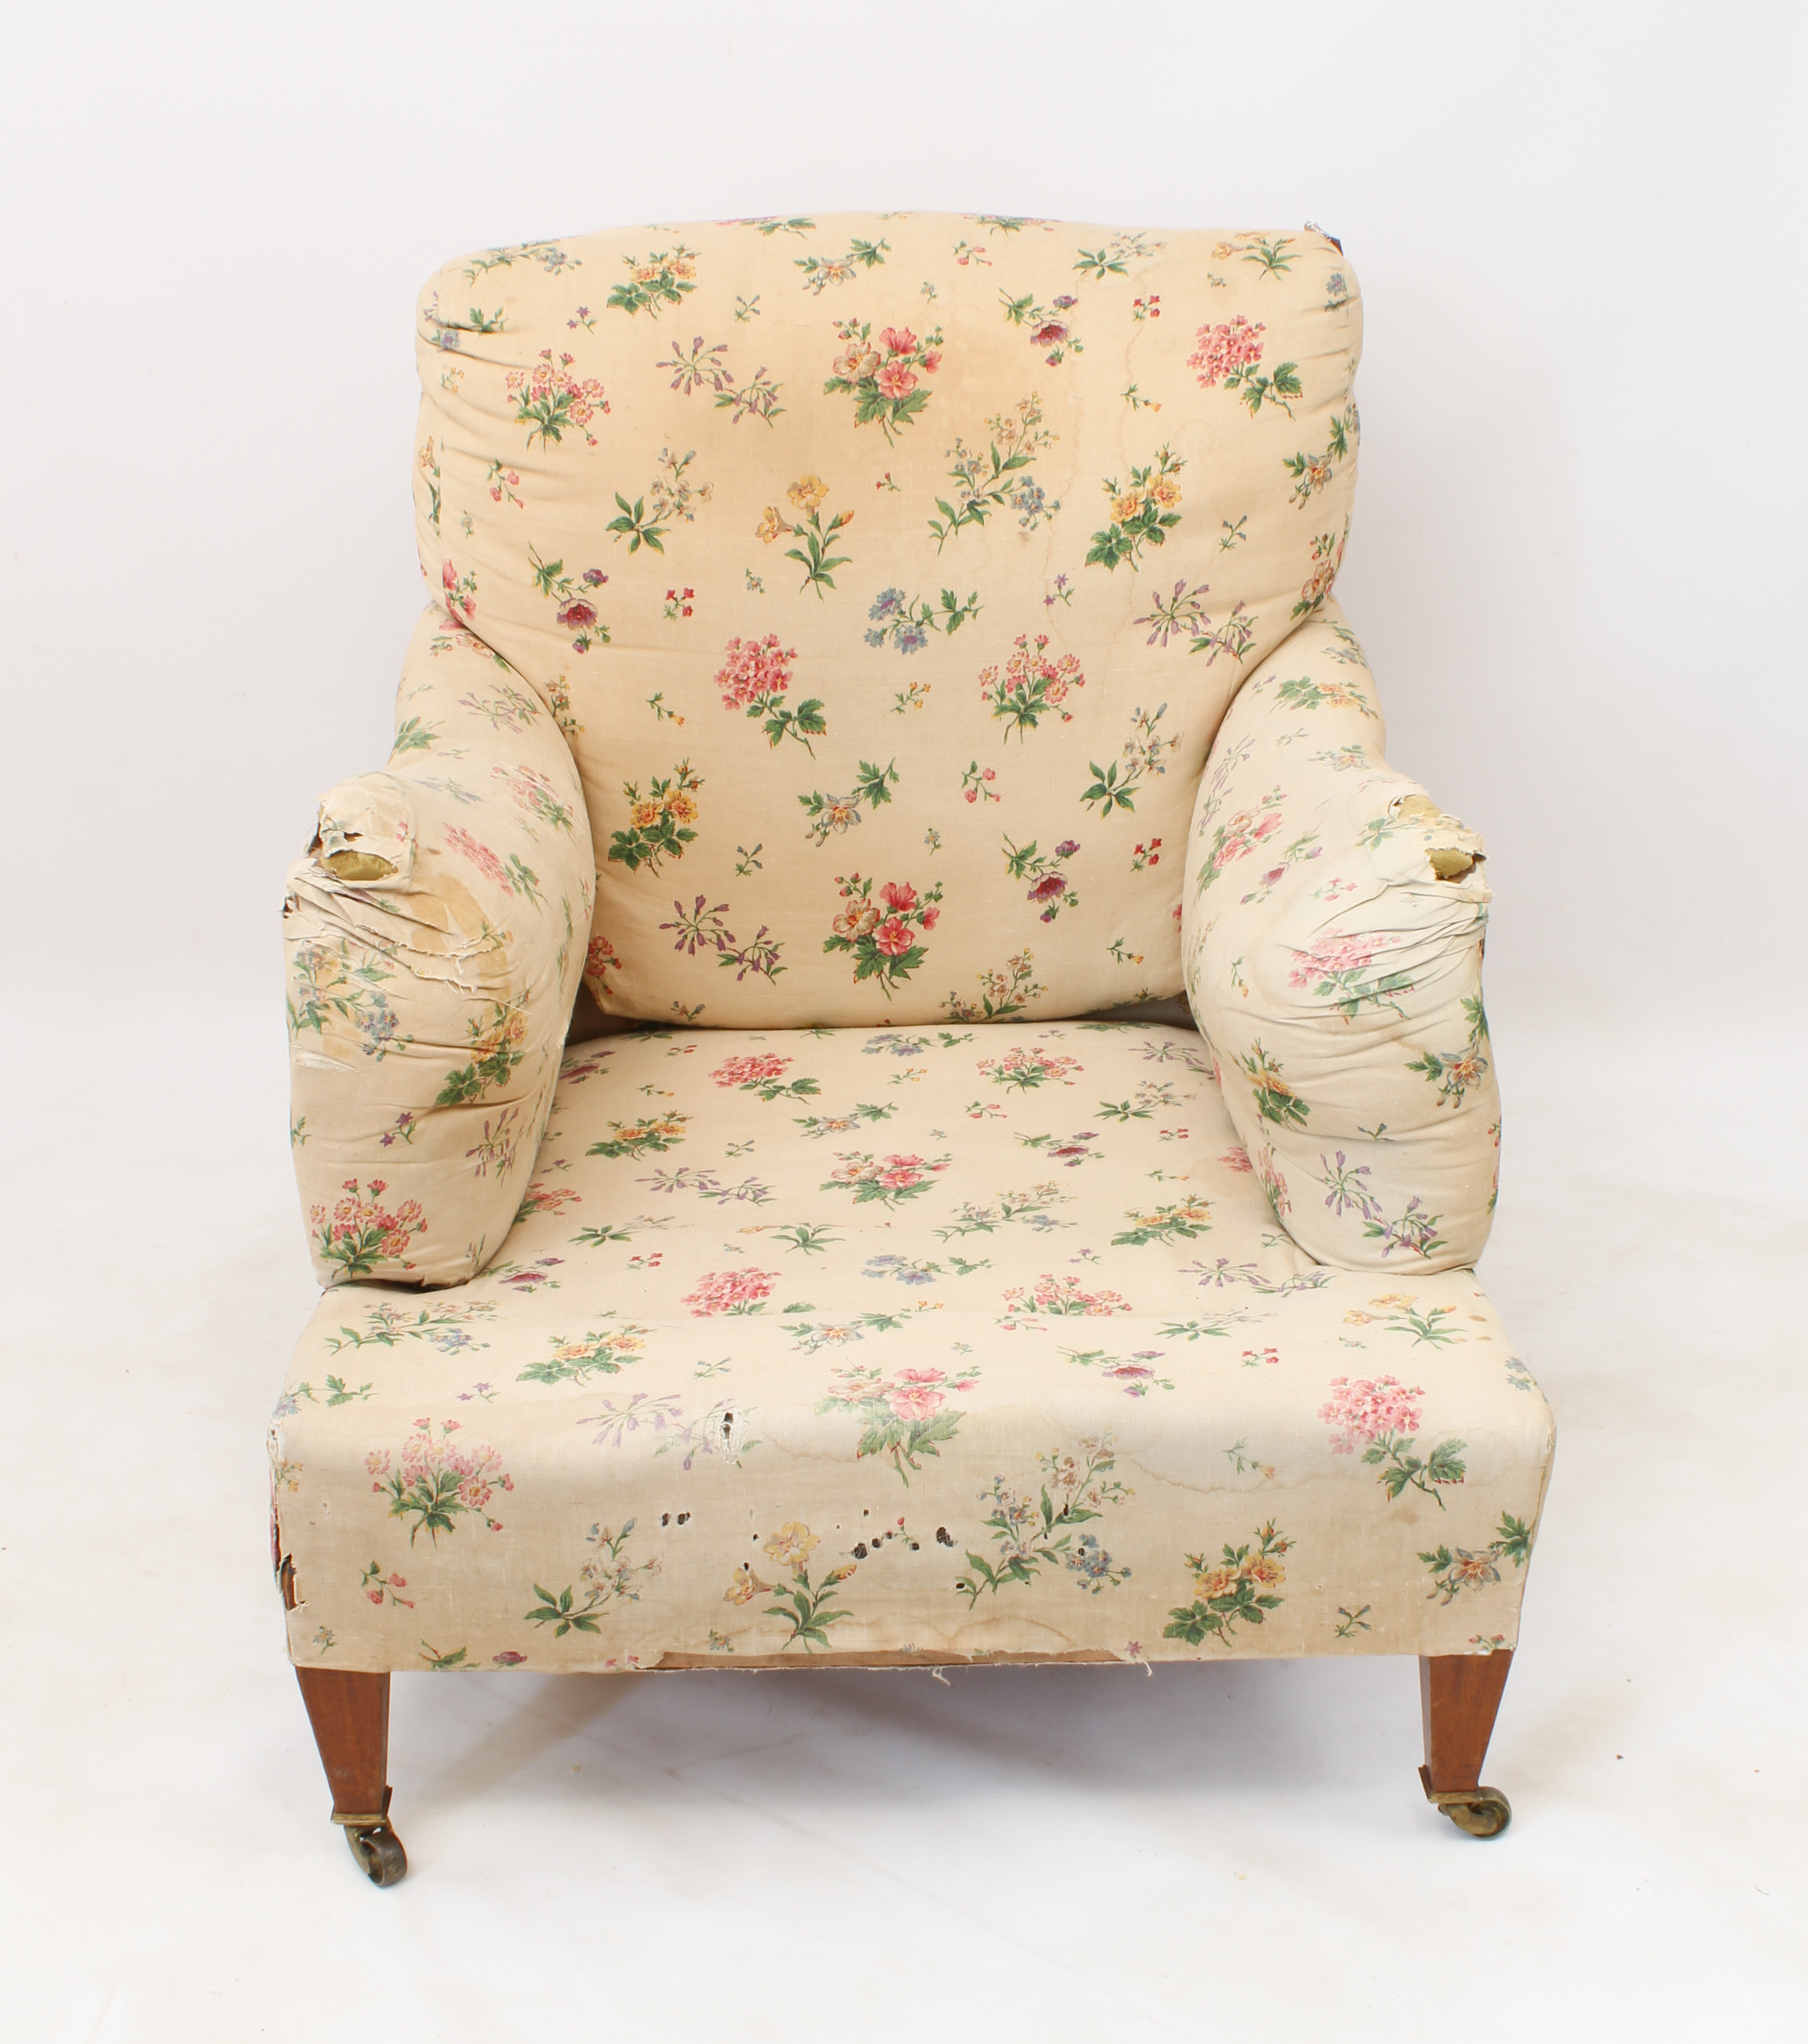 An early 20th century armchair by Howard & Sons - upholstered in early 20th century printed floral - Bild 3 aus 16